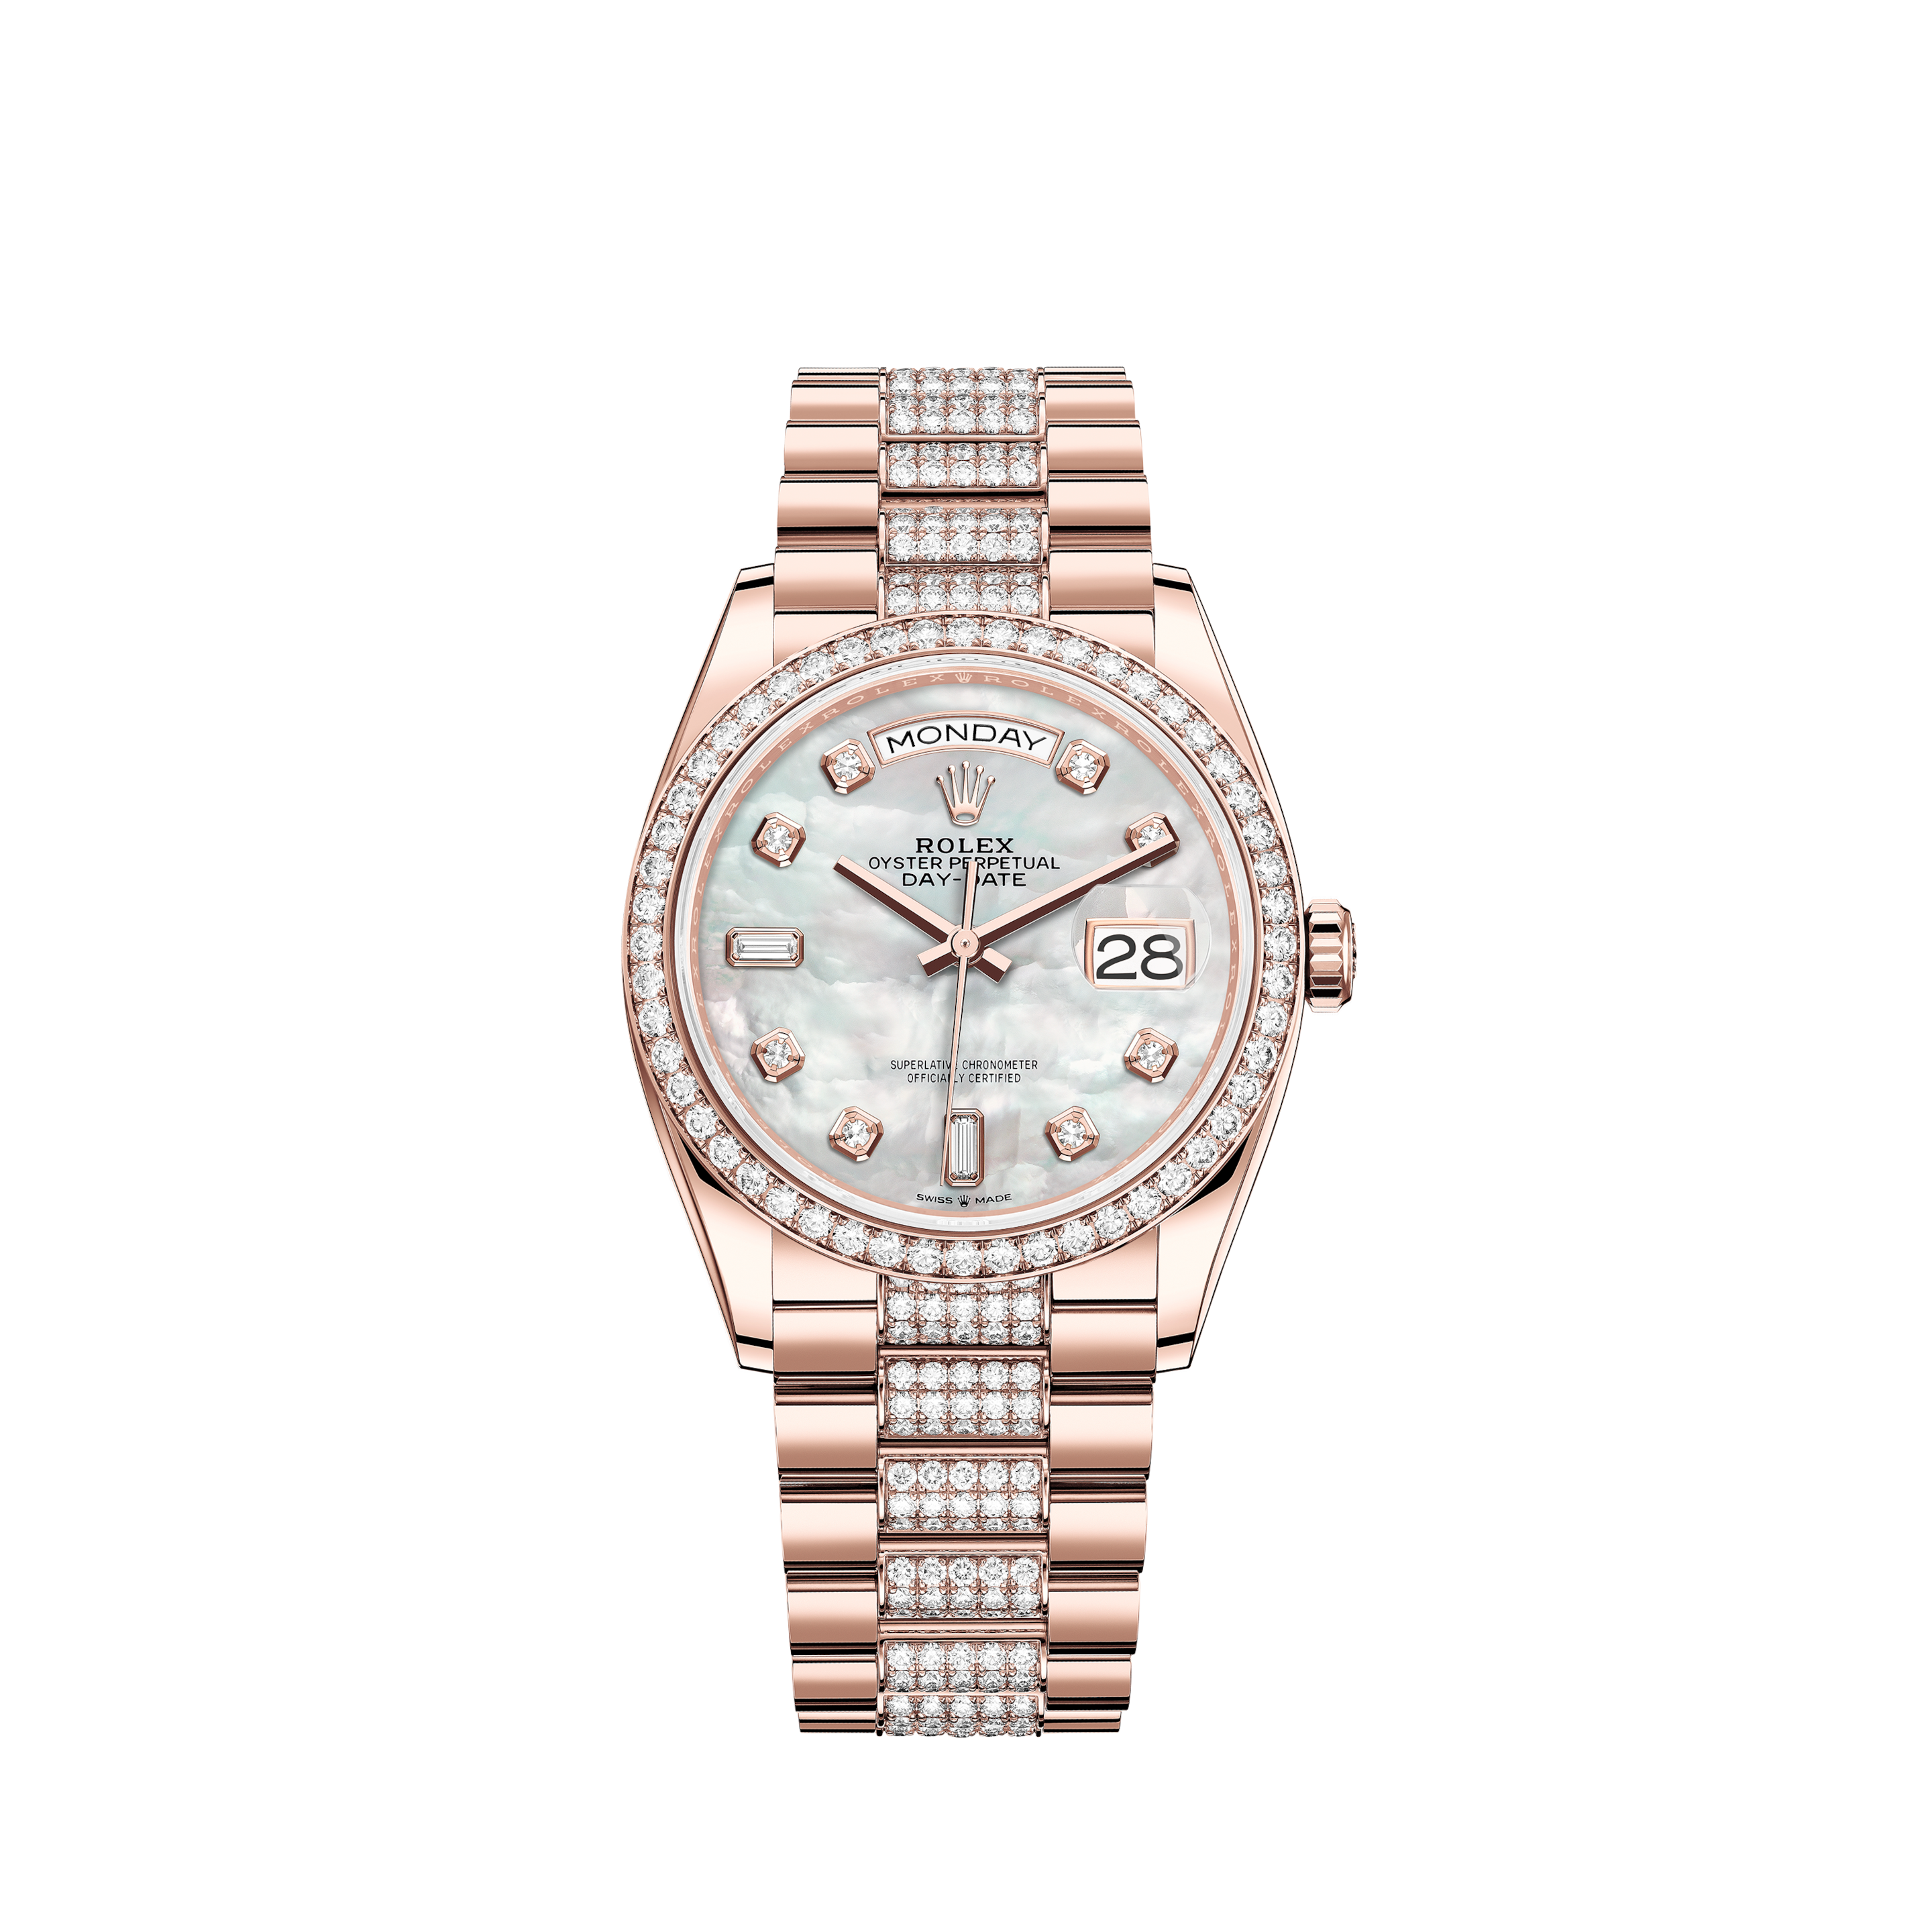 Rolex Women's New Style Steel Datejust Oyster Band with Green Diamond DialRolex Women's New Style Steel Datejust Oyster Band with Mother of Pearl Diamond Dial